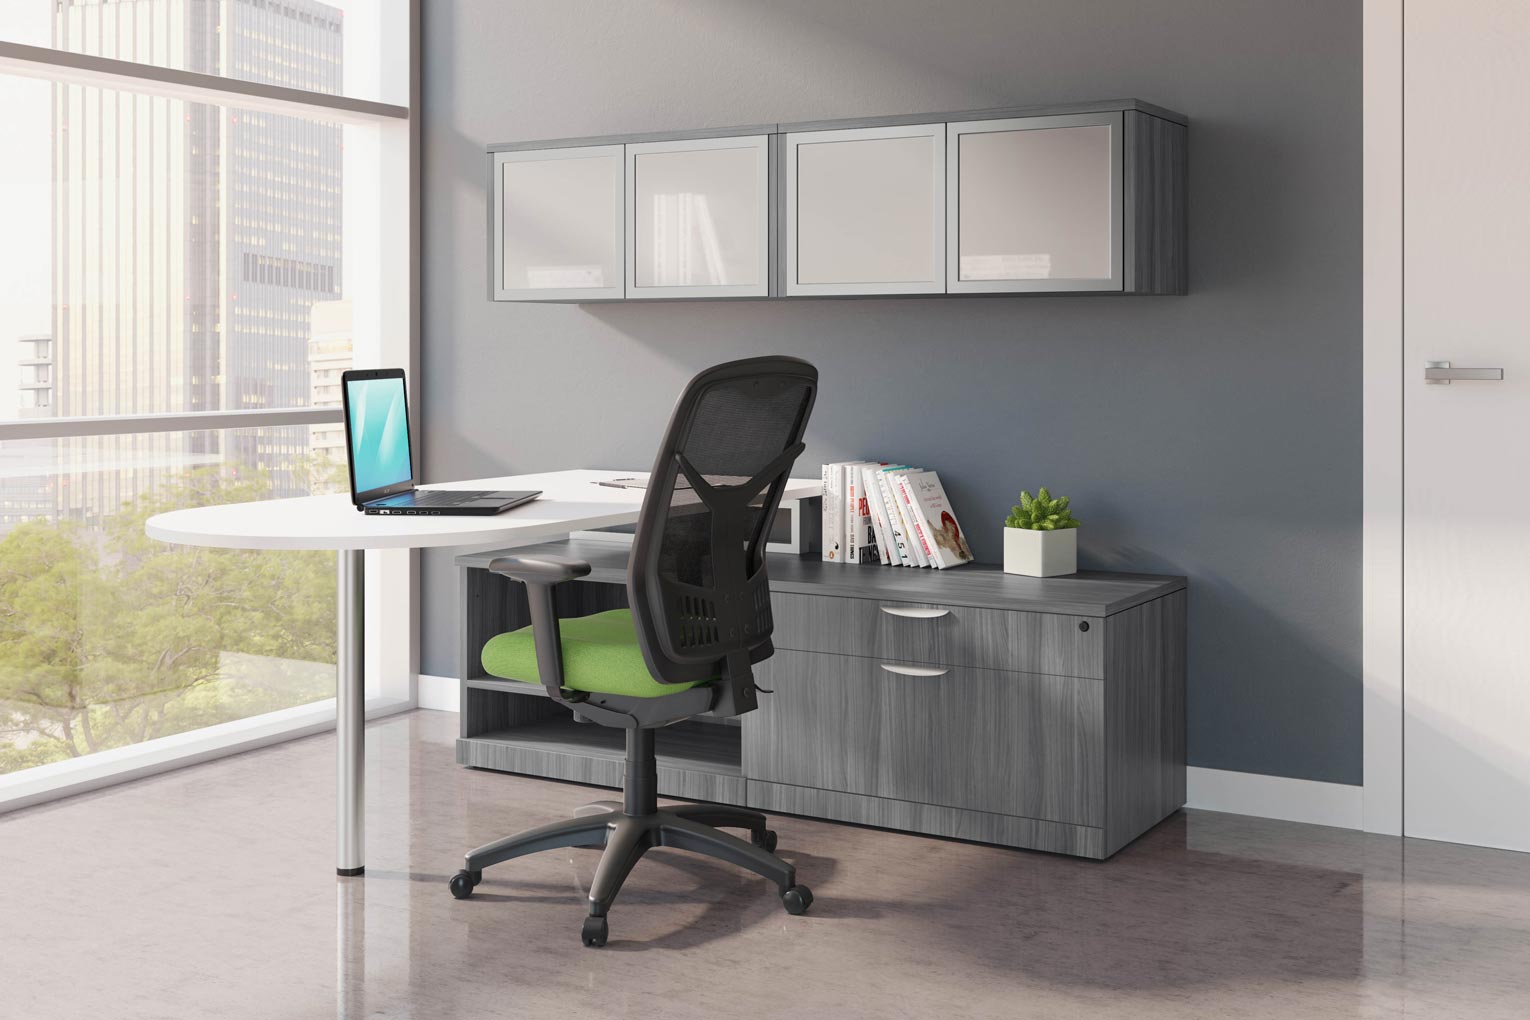 White and gray office with green chair